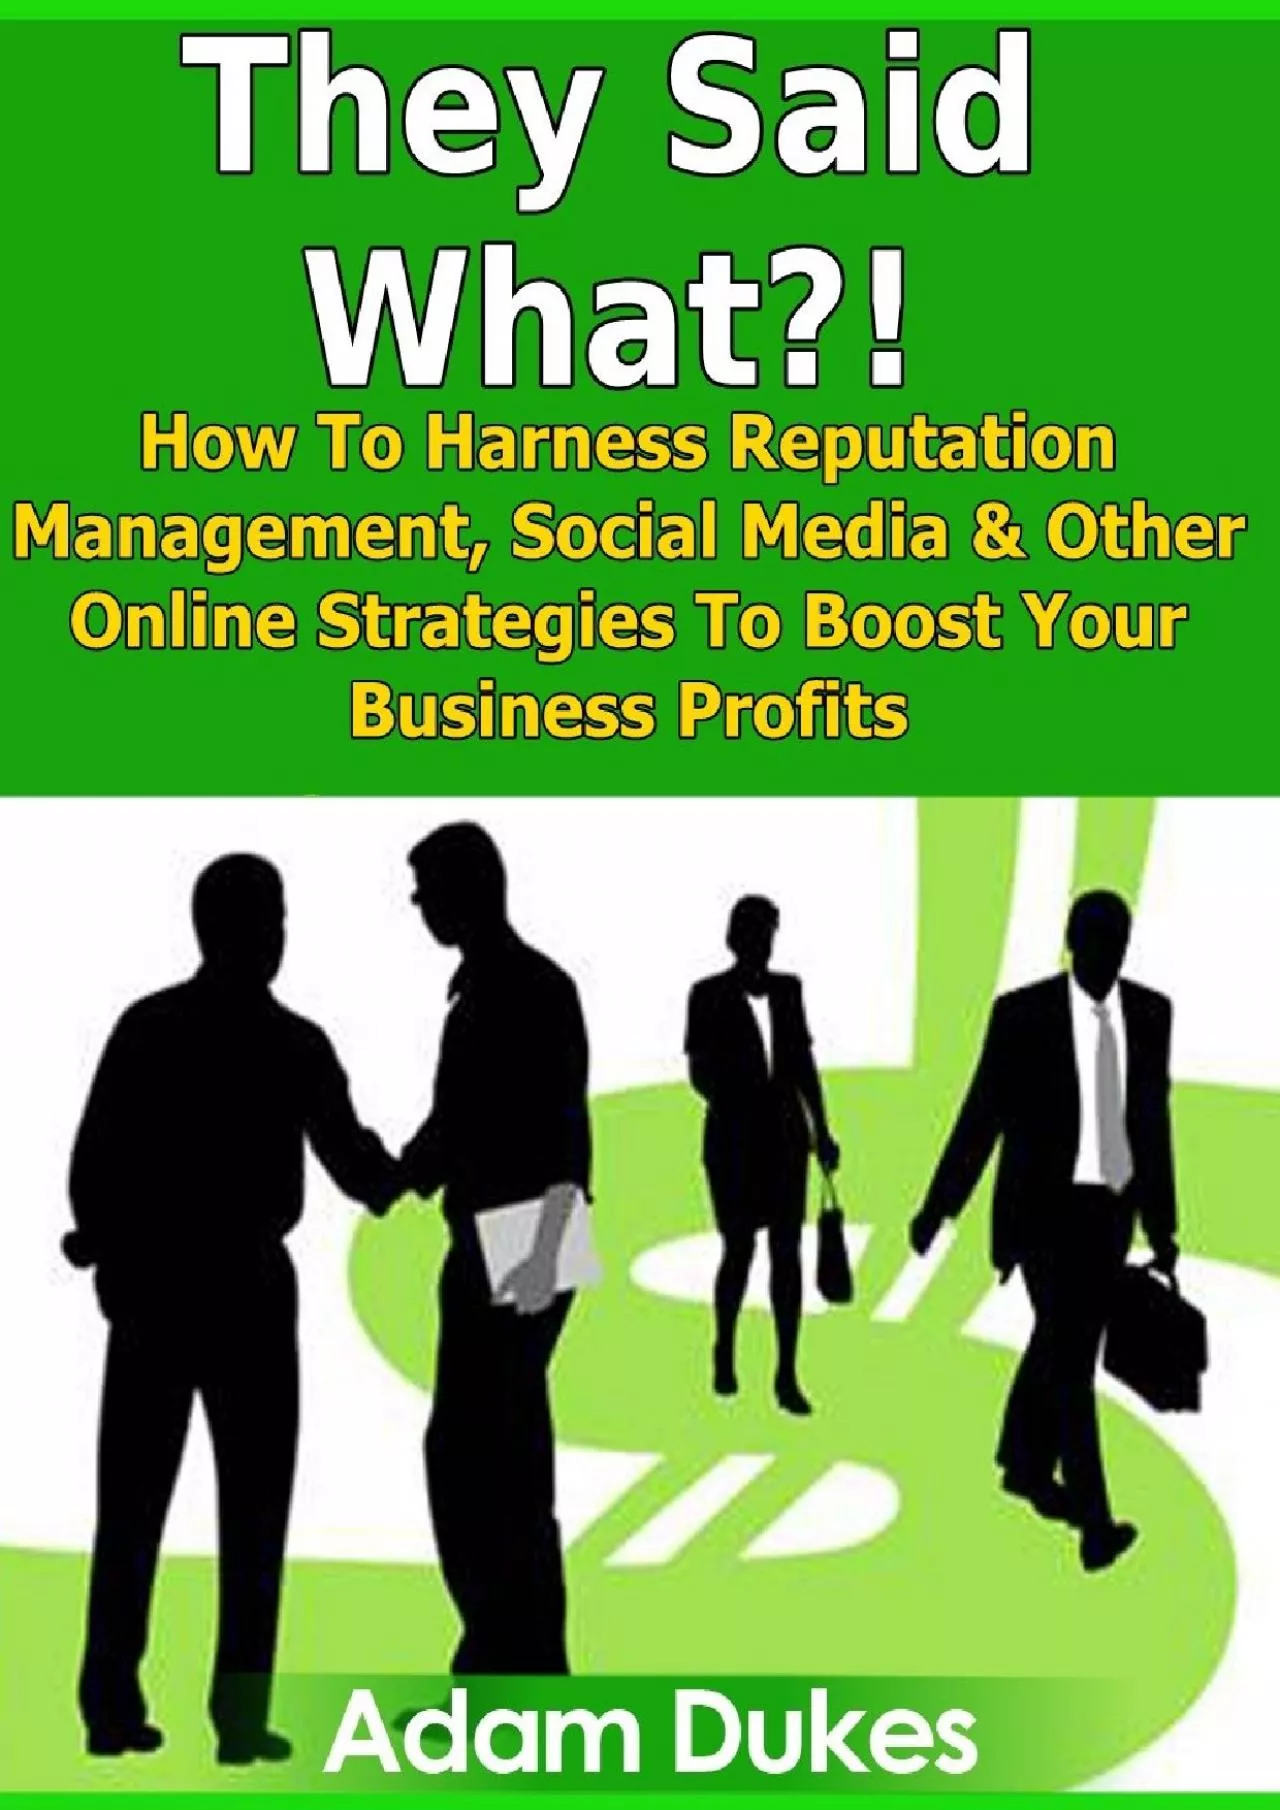 (DOWNLOAD)-They Said What?! How to Harness Reputation Management Social Media & Other